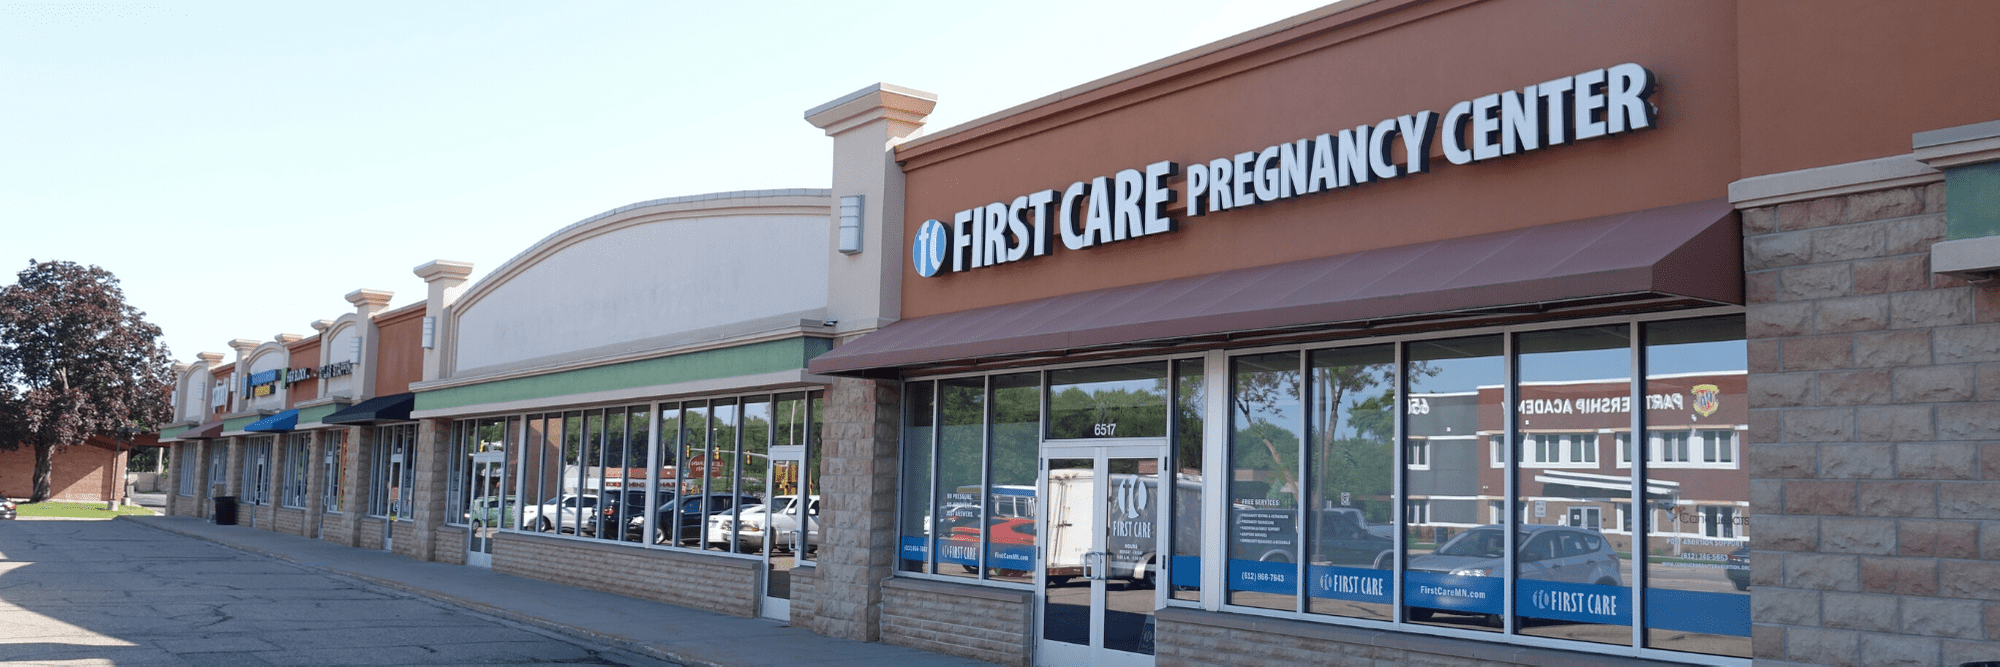 Tour A First Care Pregnancy Center - New Life Family Services